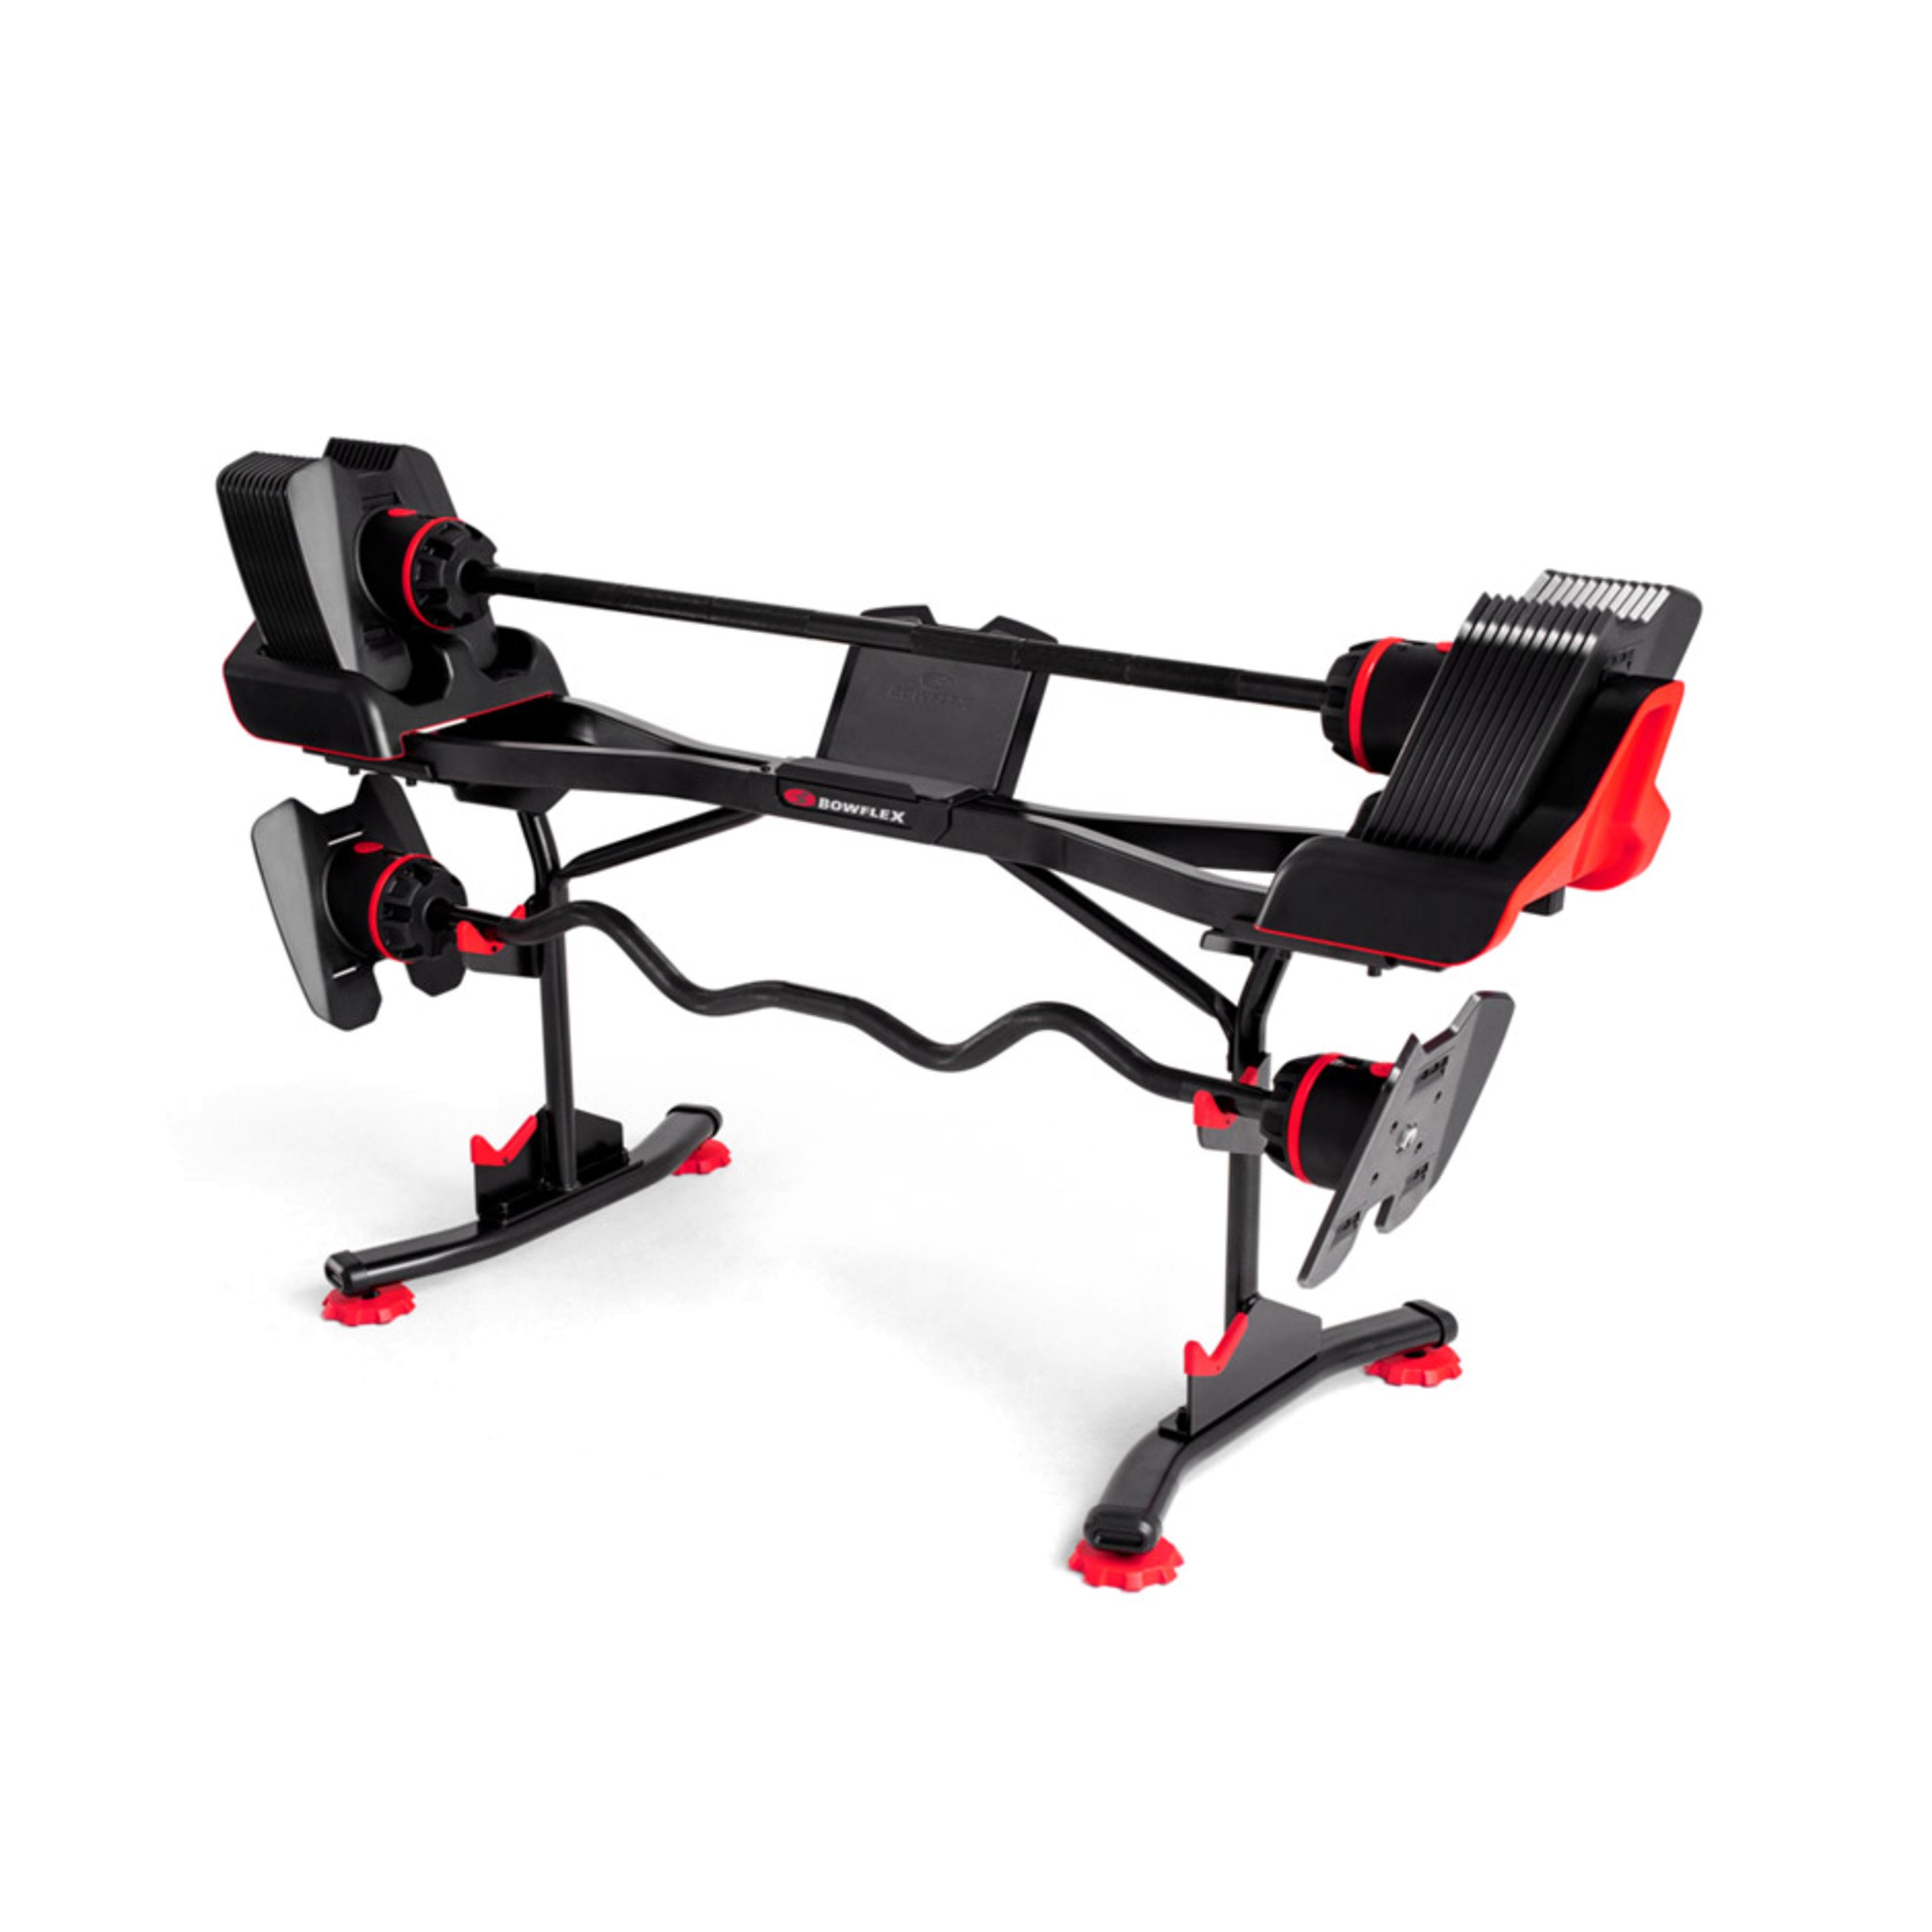 Bowflex Stand Barbell And Curlbar With Media Rack